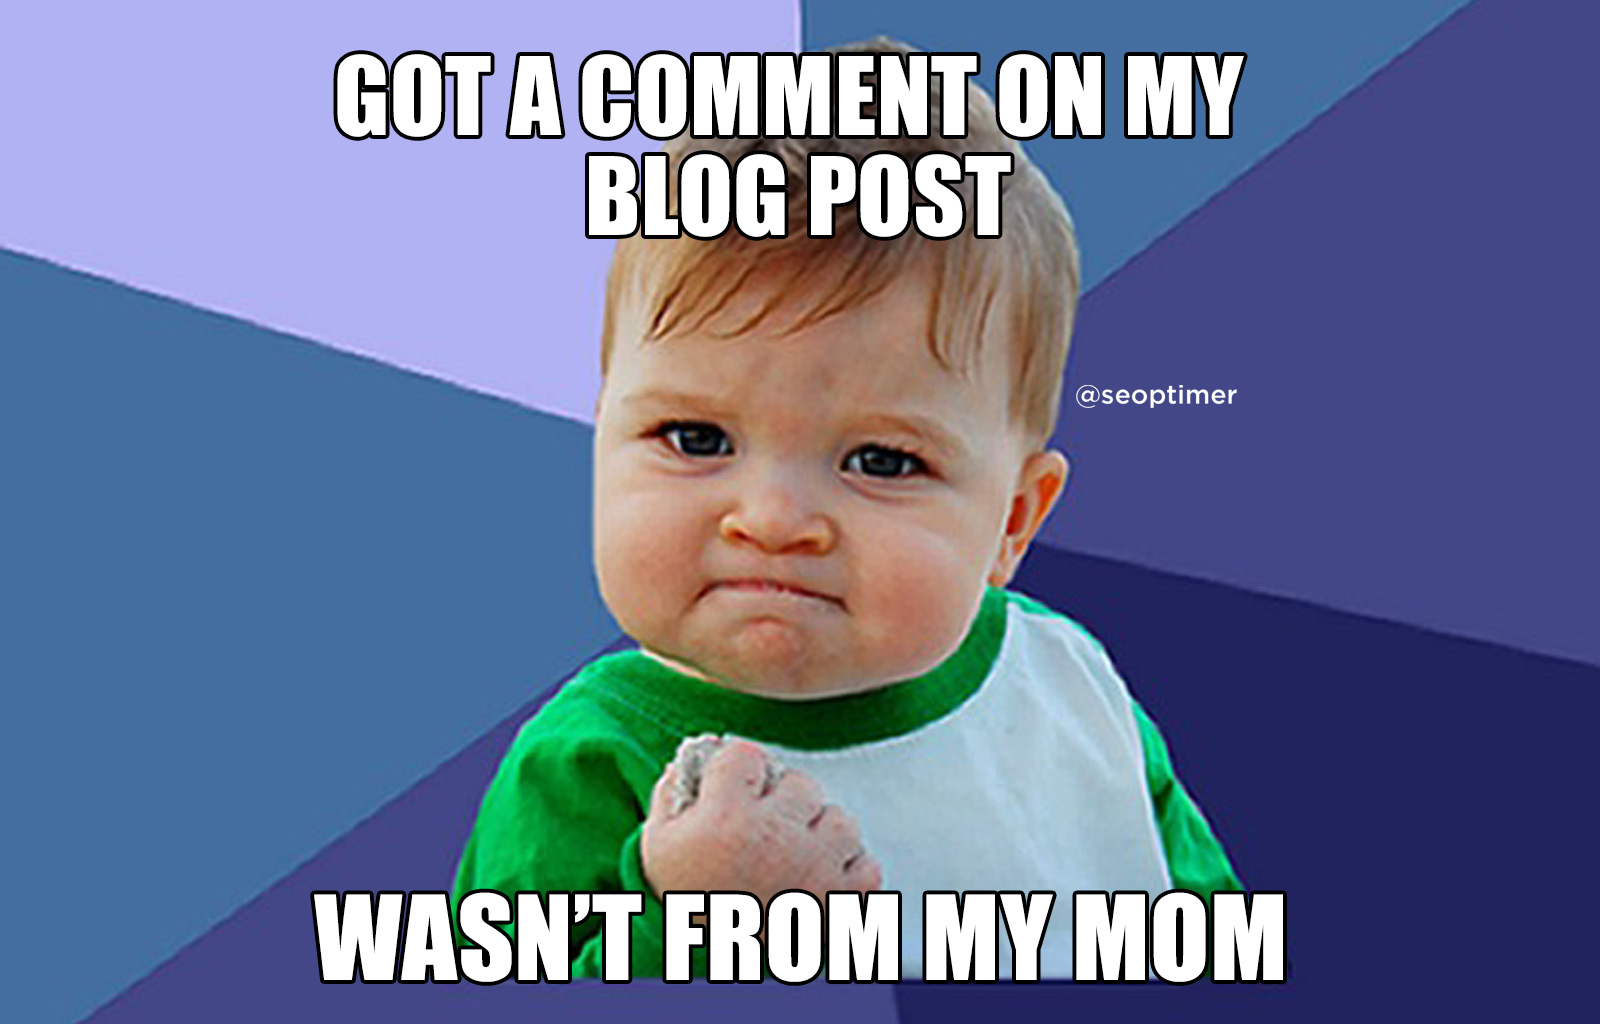 Comment on blog